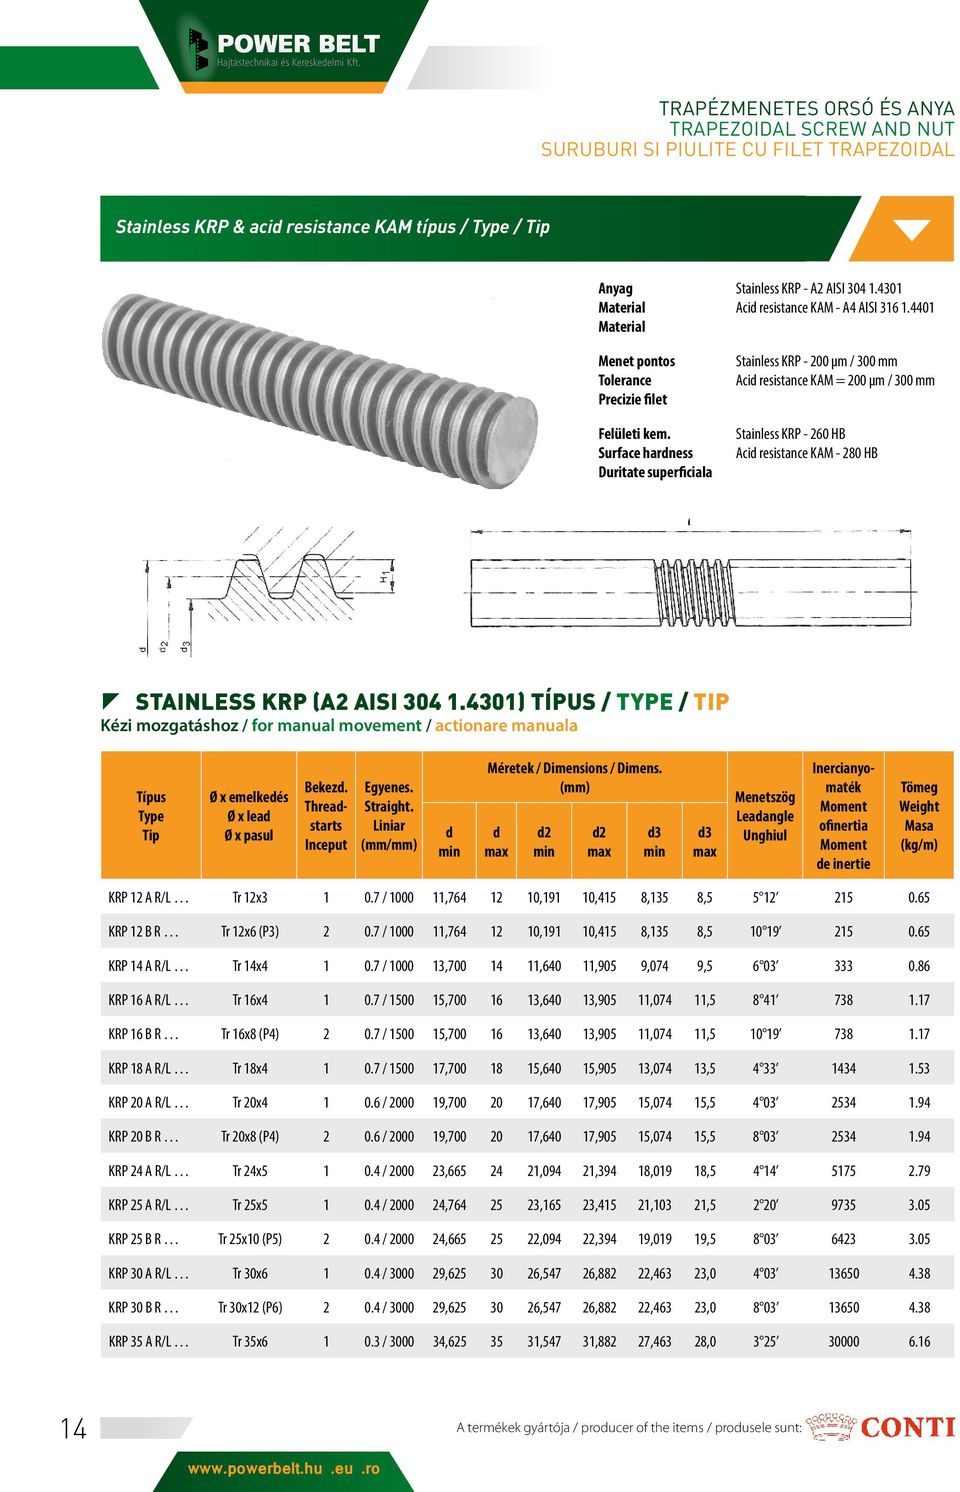 4401 Stainless KRP - 200 µm / 300 mm Acid resistance KAM = 200 µm / 300 mm Stainless KRP - 260 HB Acid resistance KAM - 280 HB STAINLESS KRP (A2 AISI 304 1.